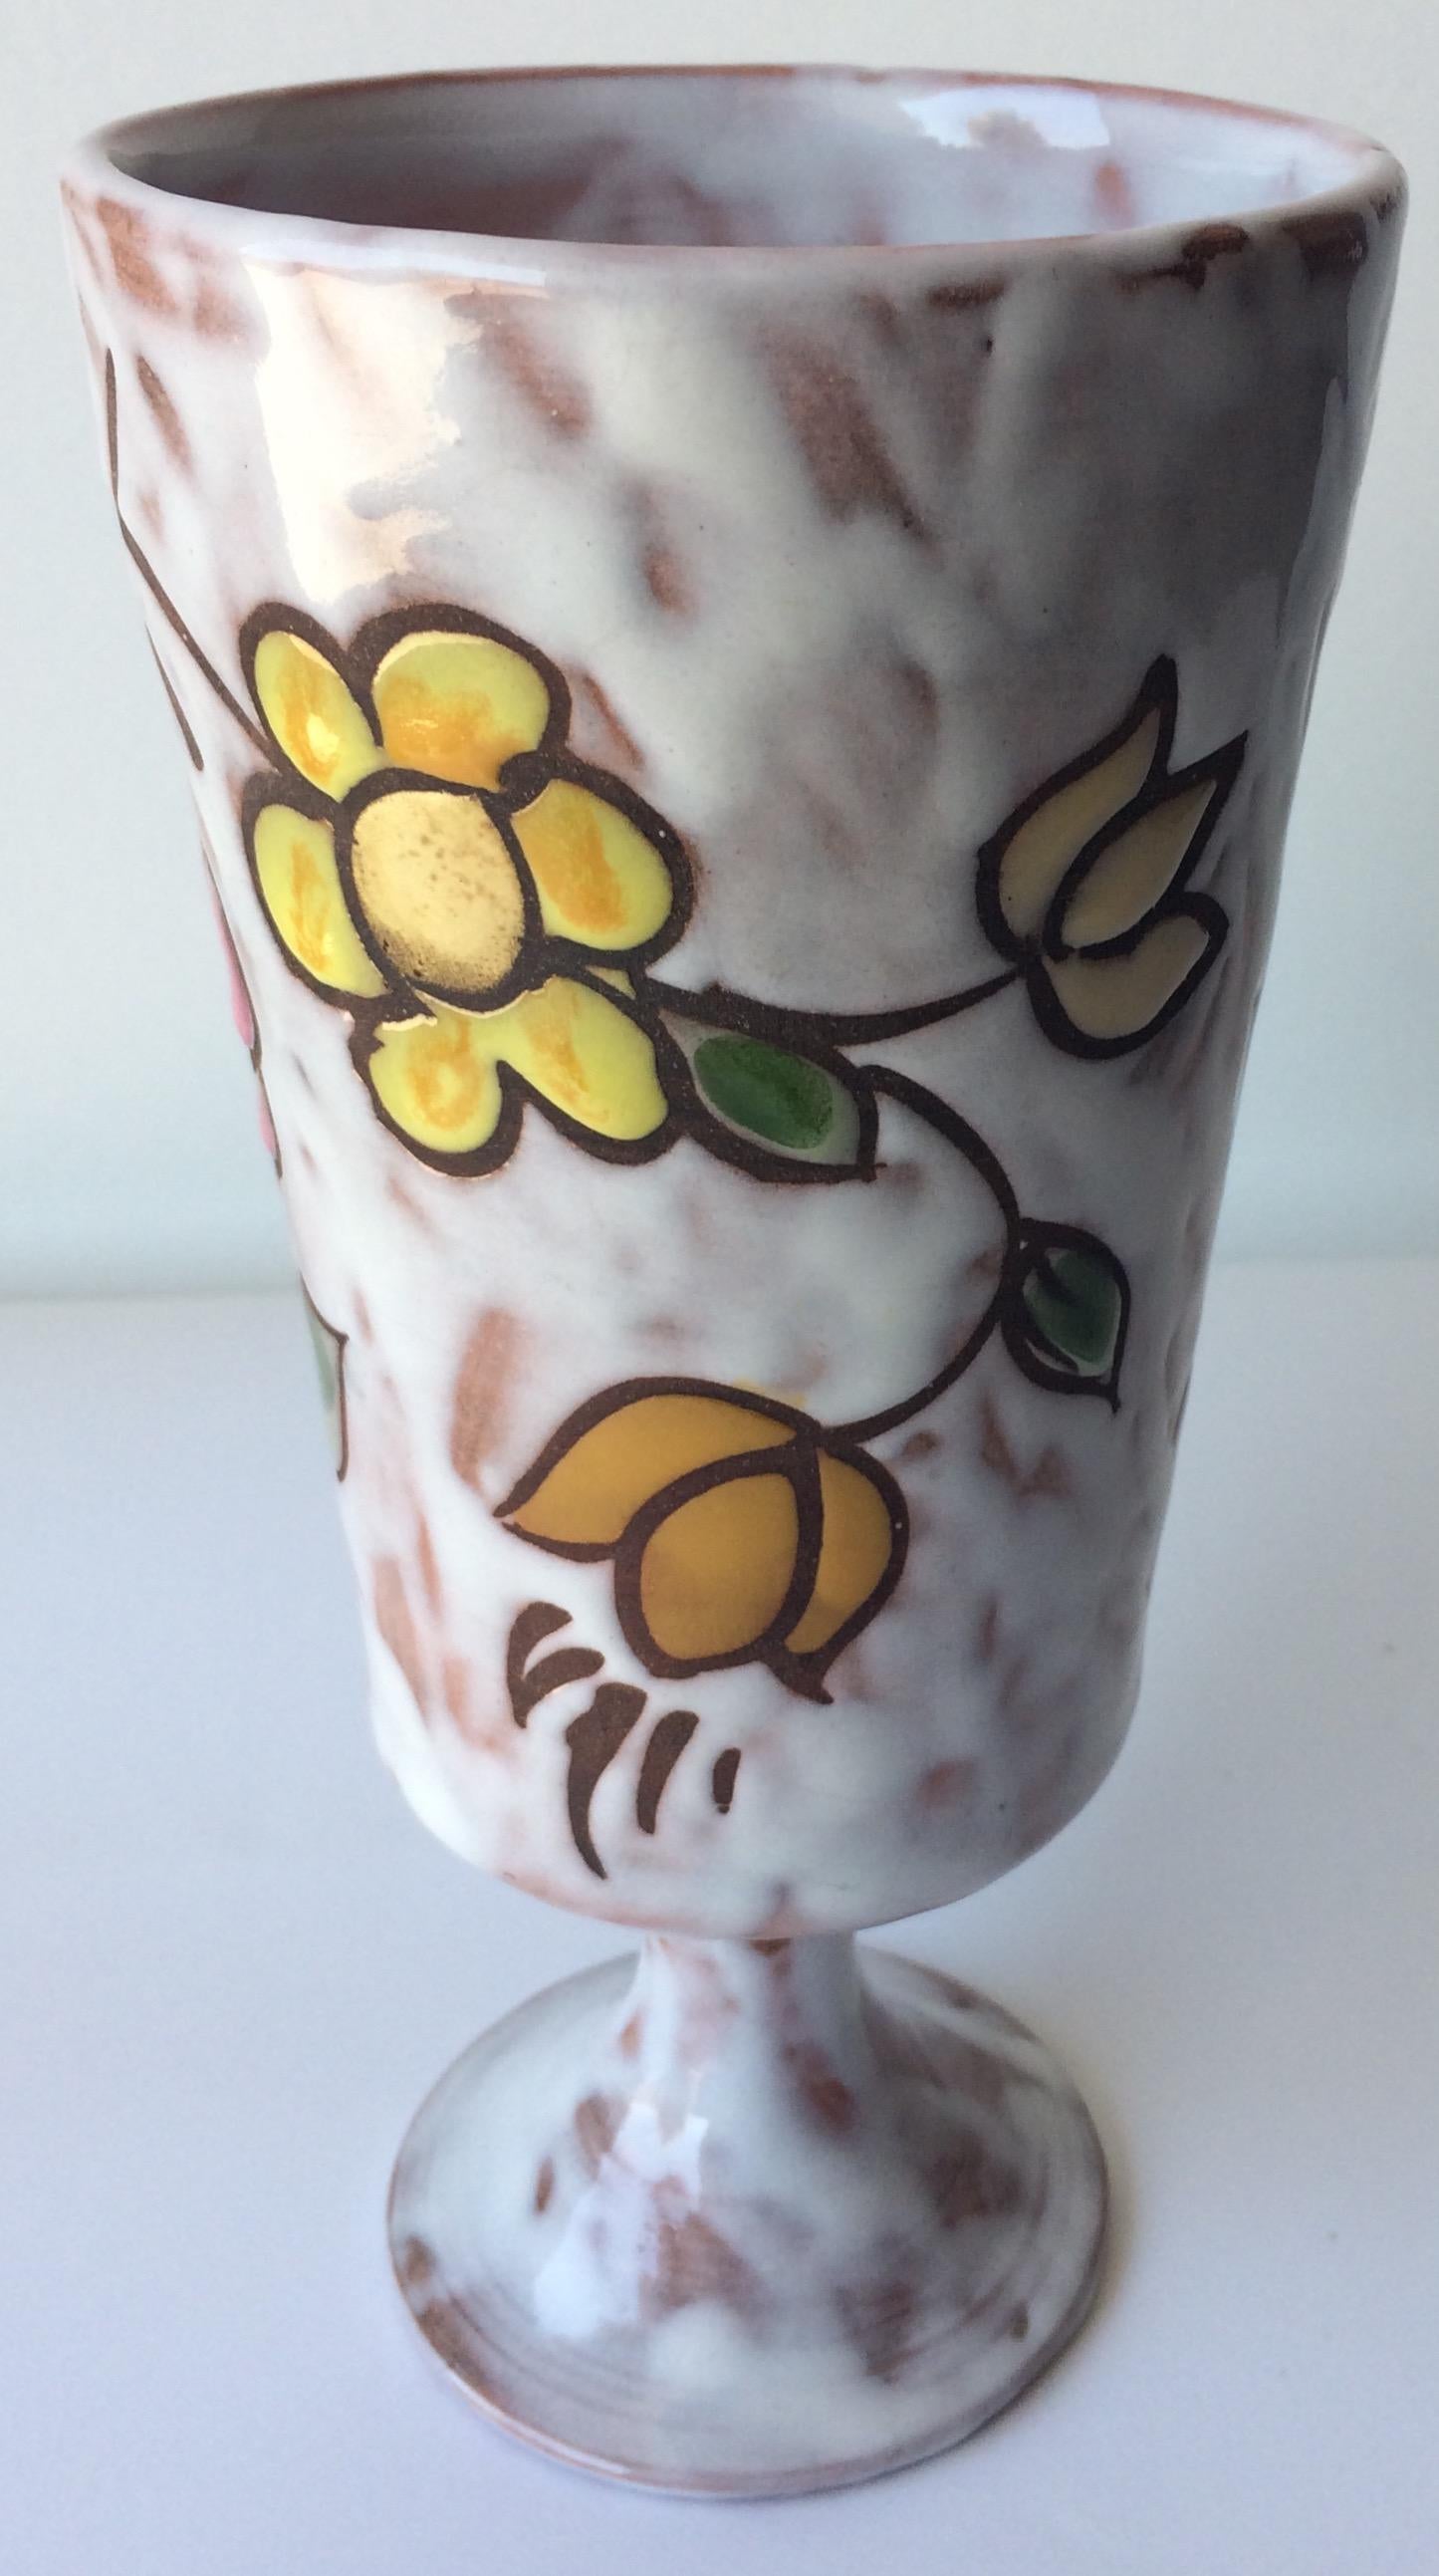 Handcrafted, hand painted French midcentury ceramic vase. 

Beautifully decorated with floral designs and glazed. 
Signed on the bottom, Miclay.
 
Measures: 
Height: 7.68 in (19.5 cm)
Diameter: 3.55 in (9 cm)
